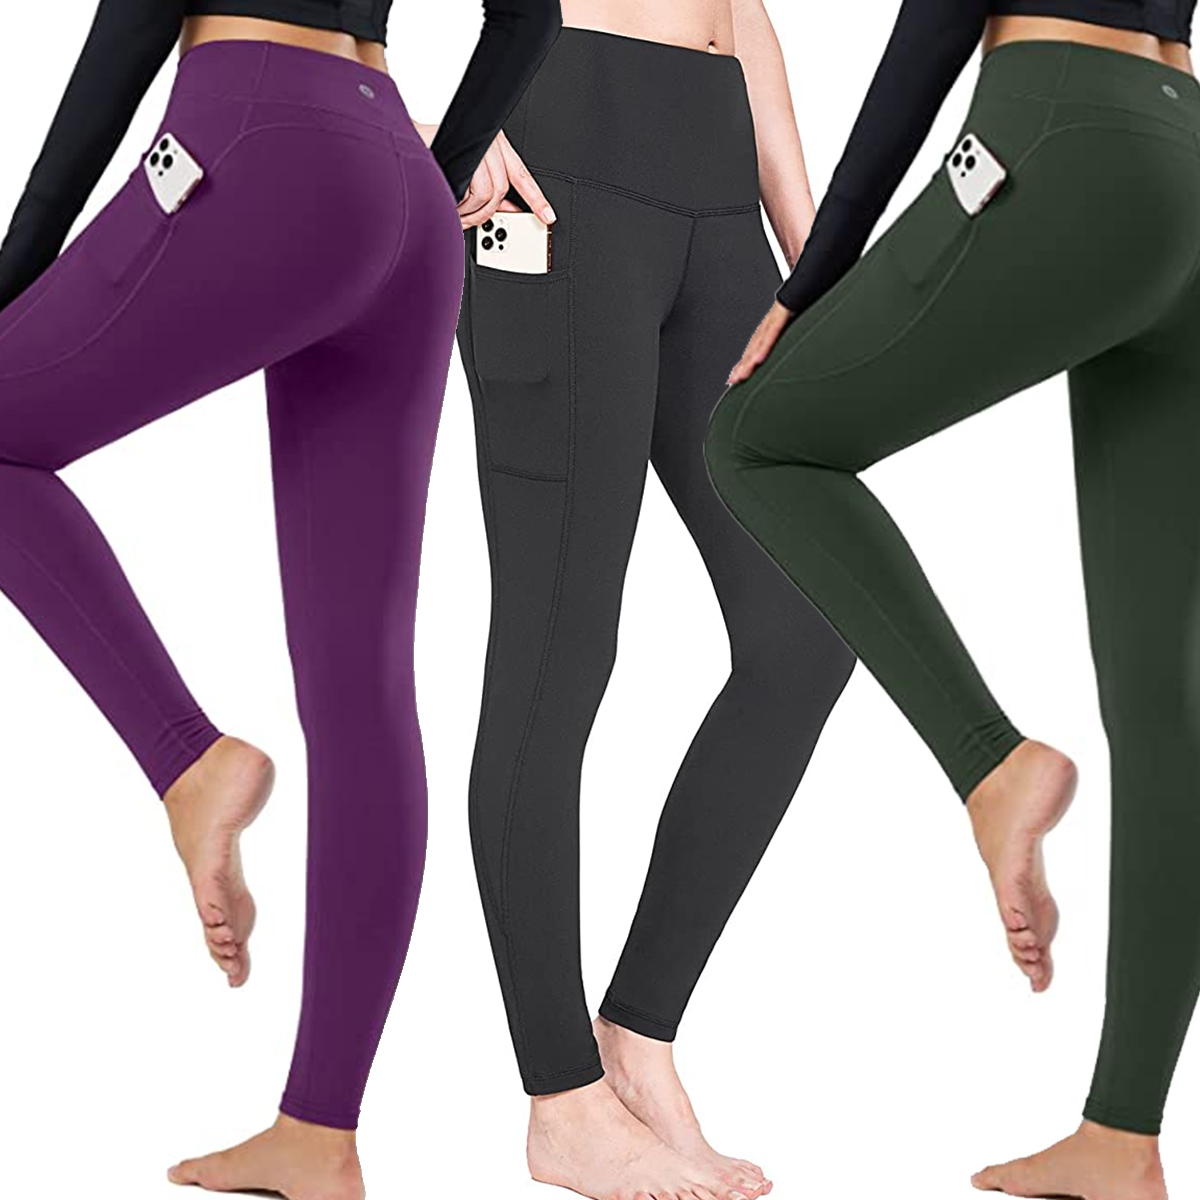 s Best-Selling Fleece-Lined Leggings Are on Sale for Just $25